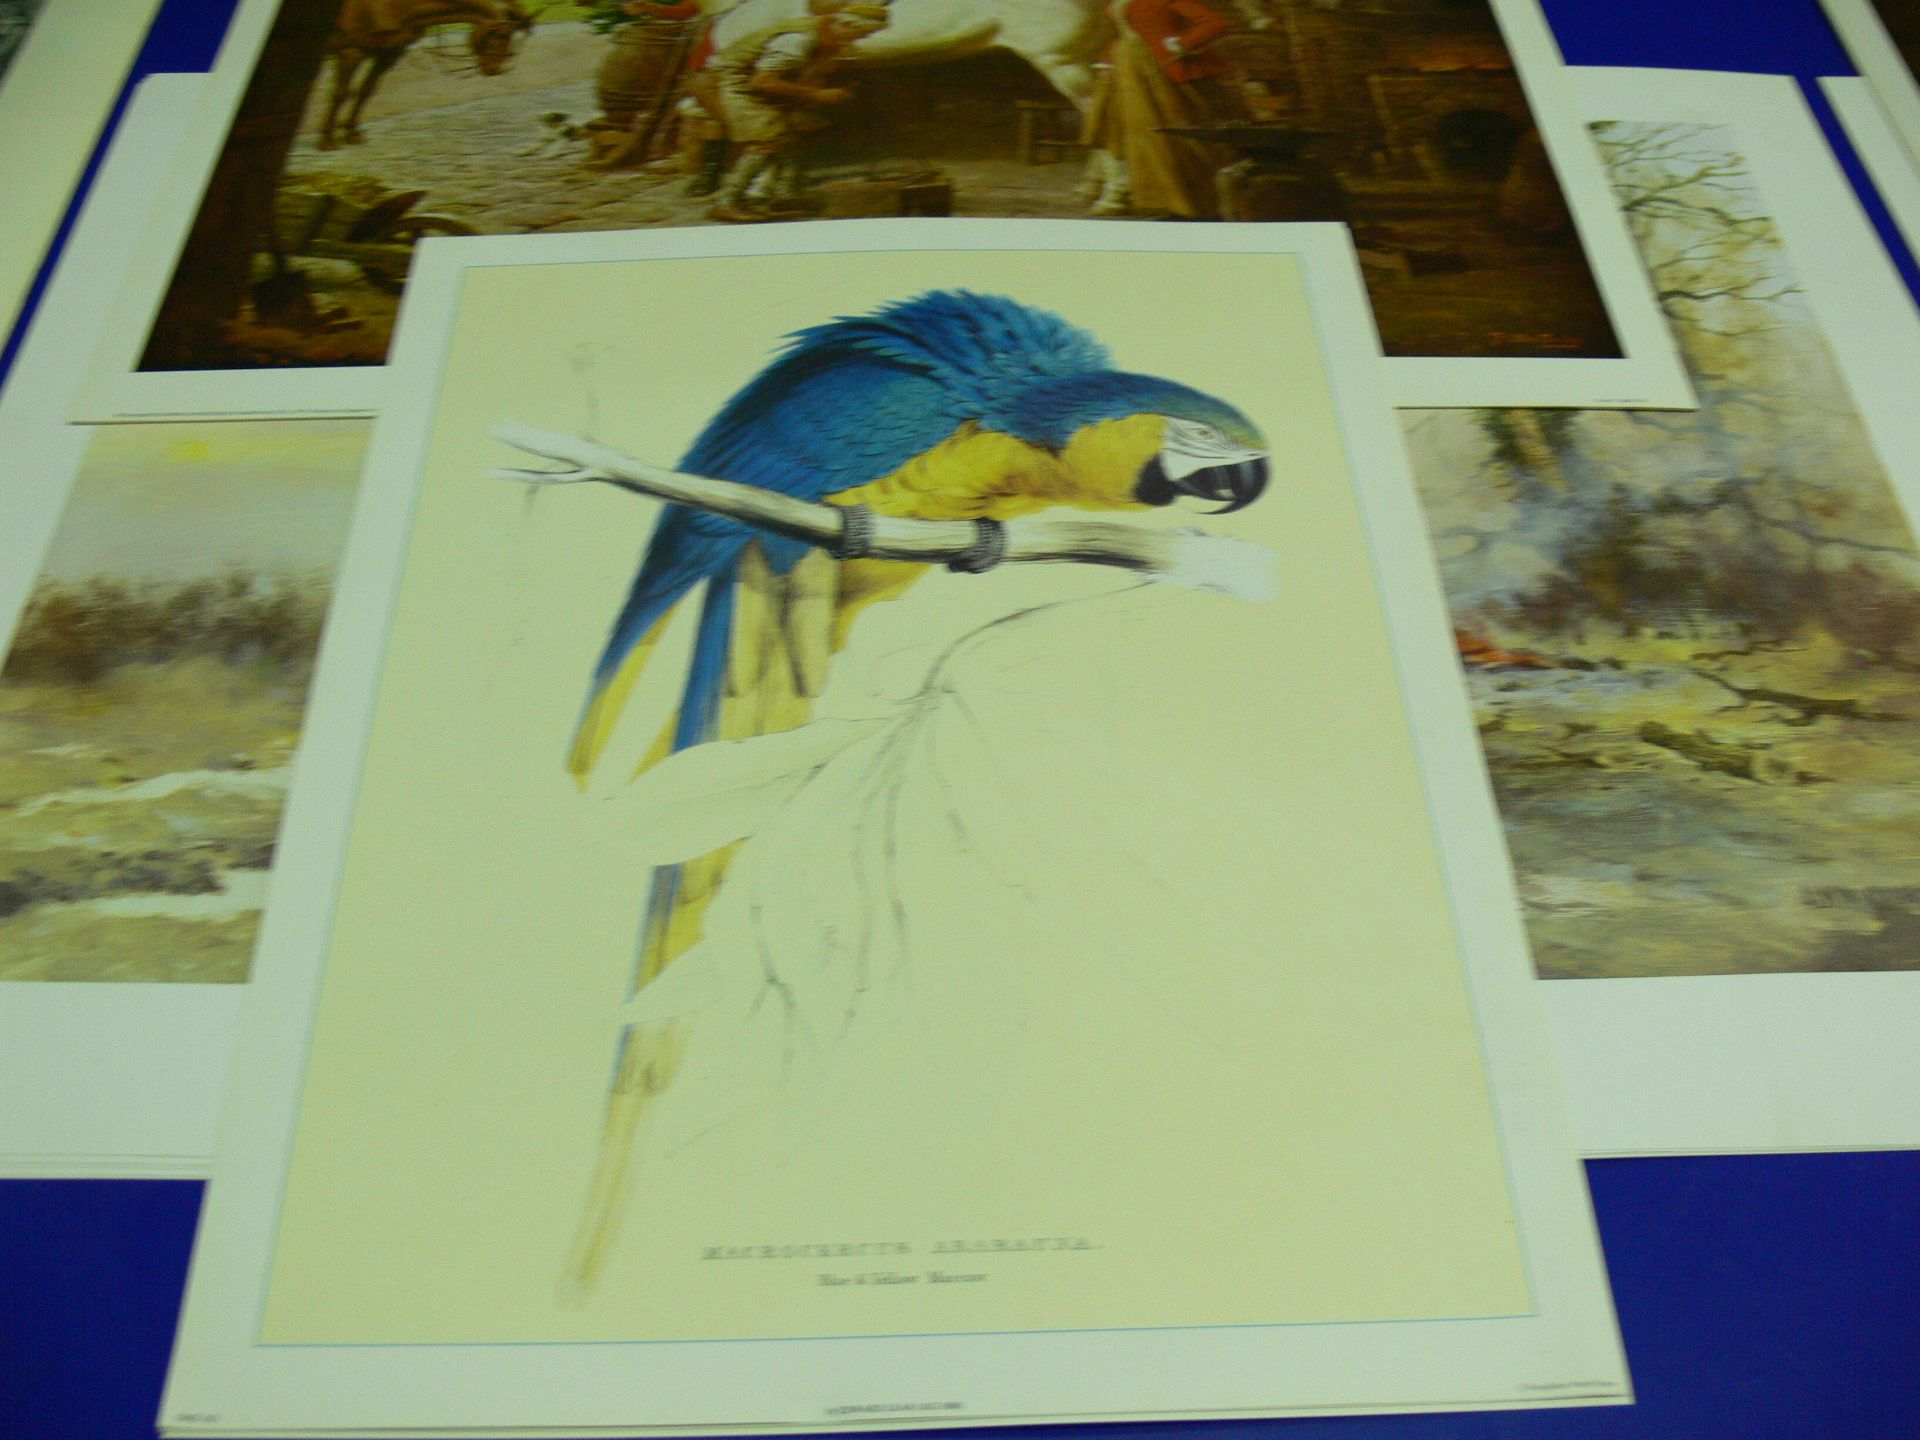 Five copies each of three coloured prints. 'The Forge' by Fortunino Matania (47cm x 56cm), 'Clearing - Image 4 of 8